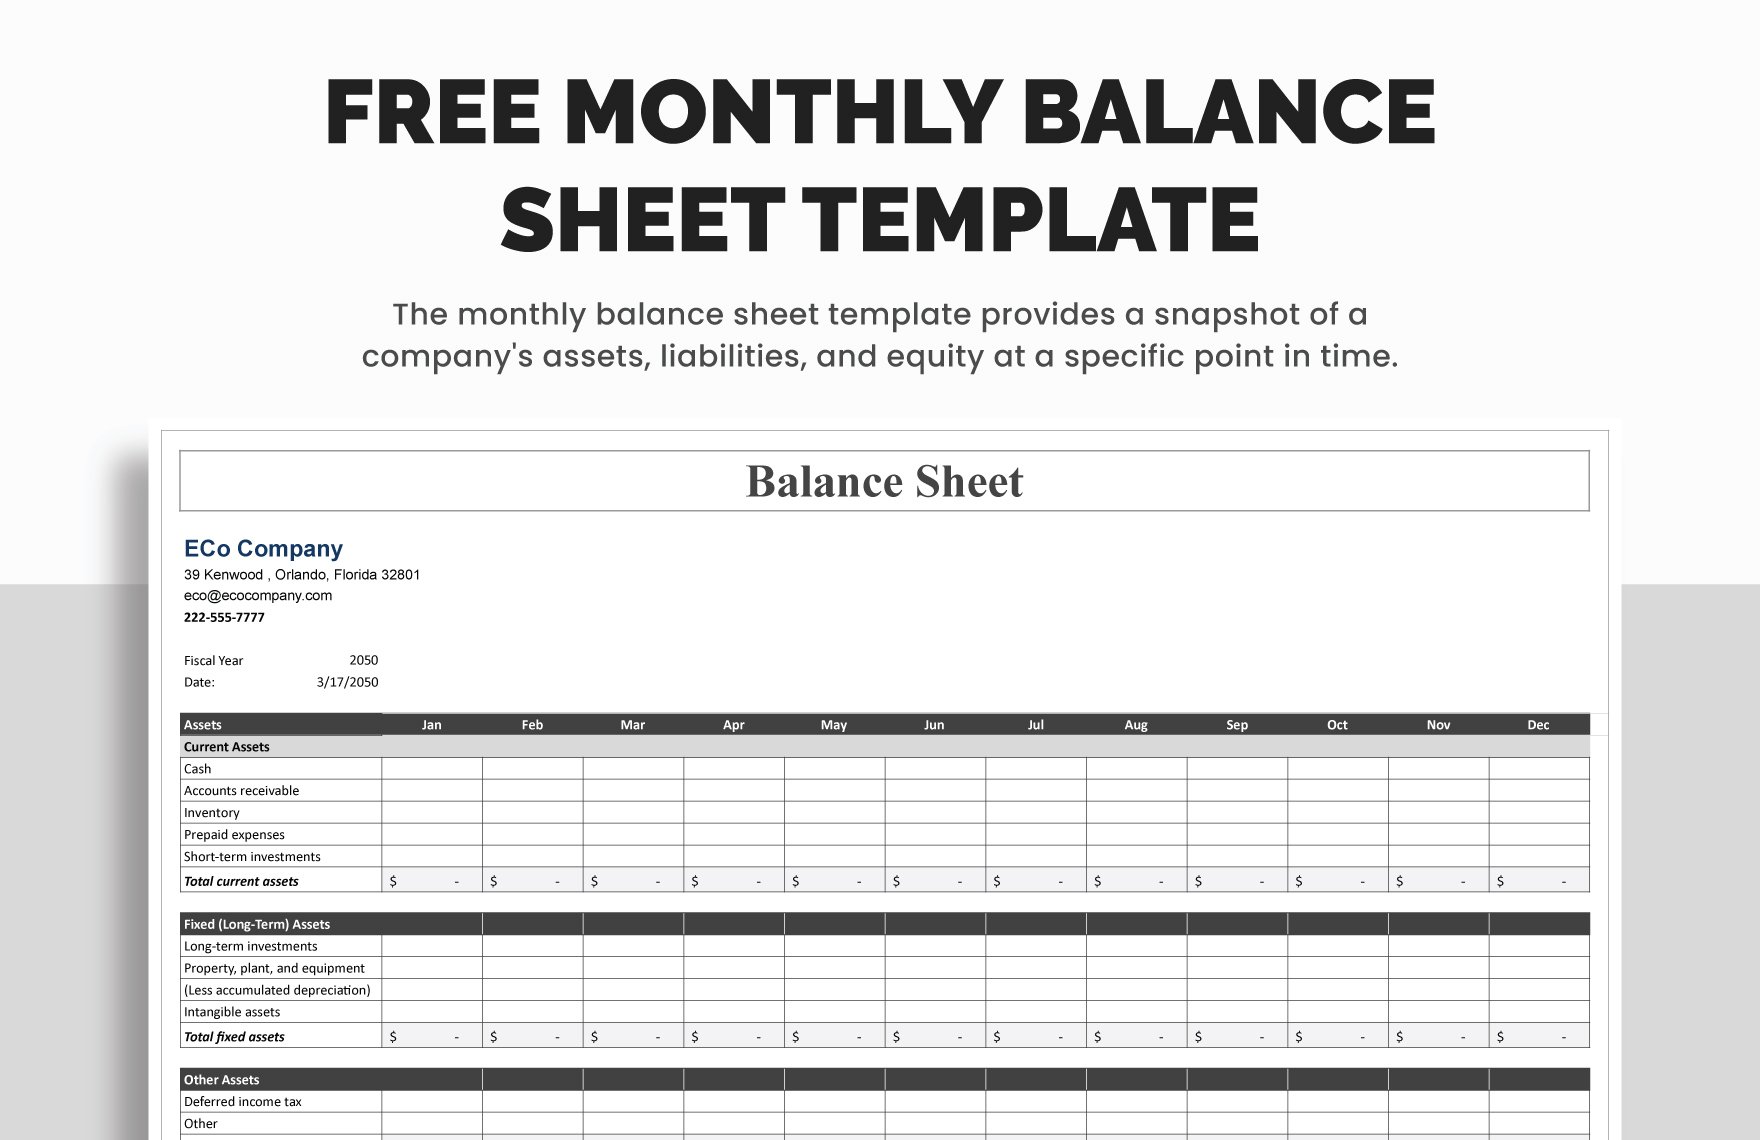 Monthly Balance Sheet Template in Word, Google Docs, Excel, Google Sheets, Apple Pages, Apple Numbers